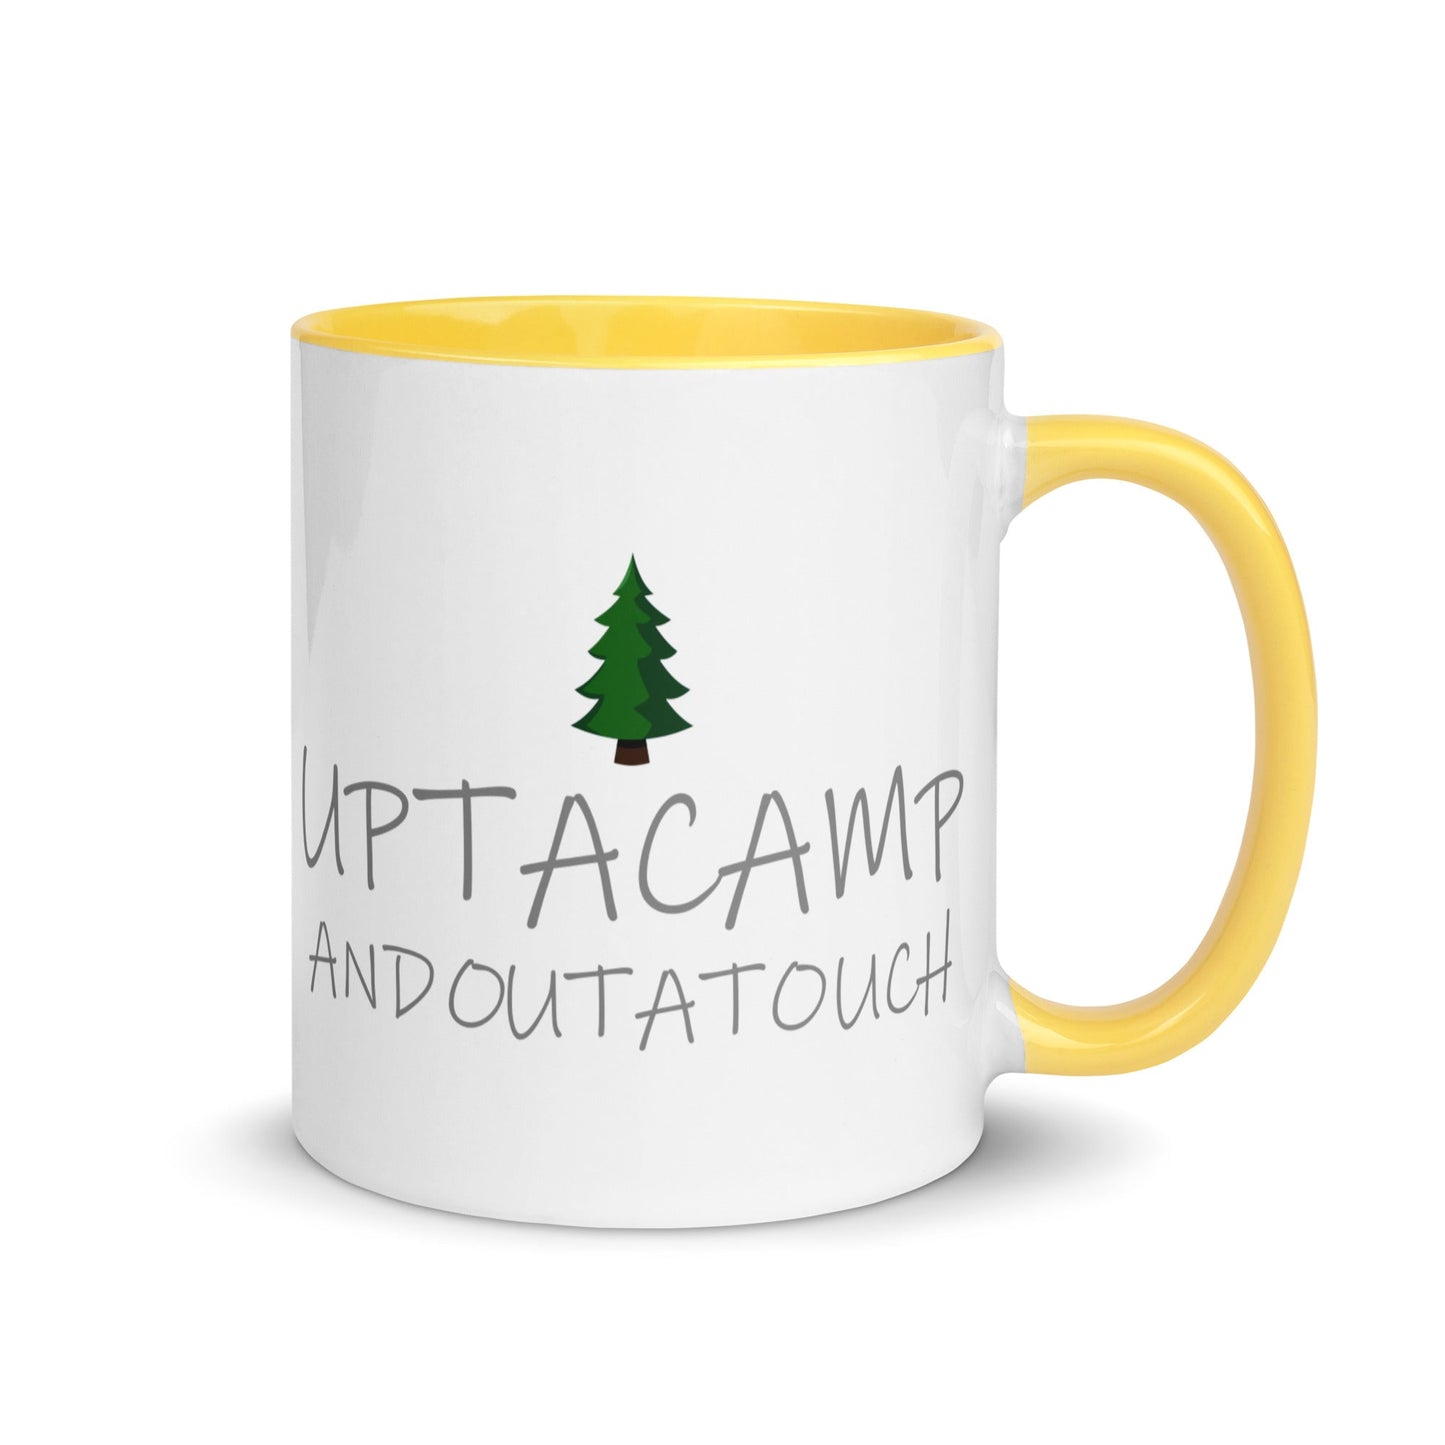 Upta Camp Outa Touch Mug with Color Inside